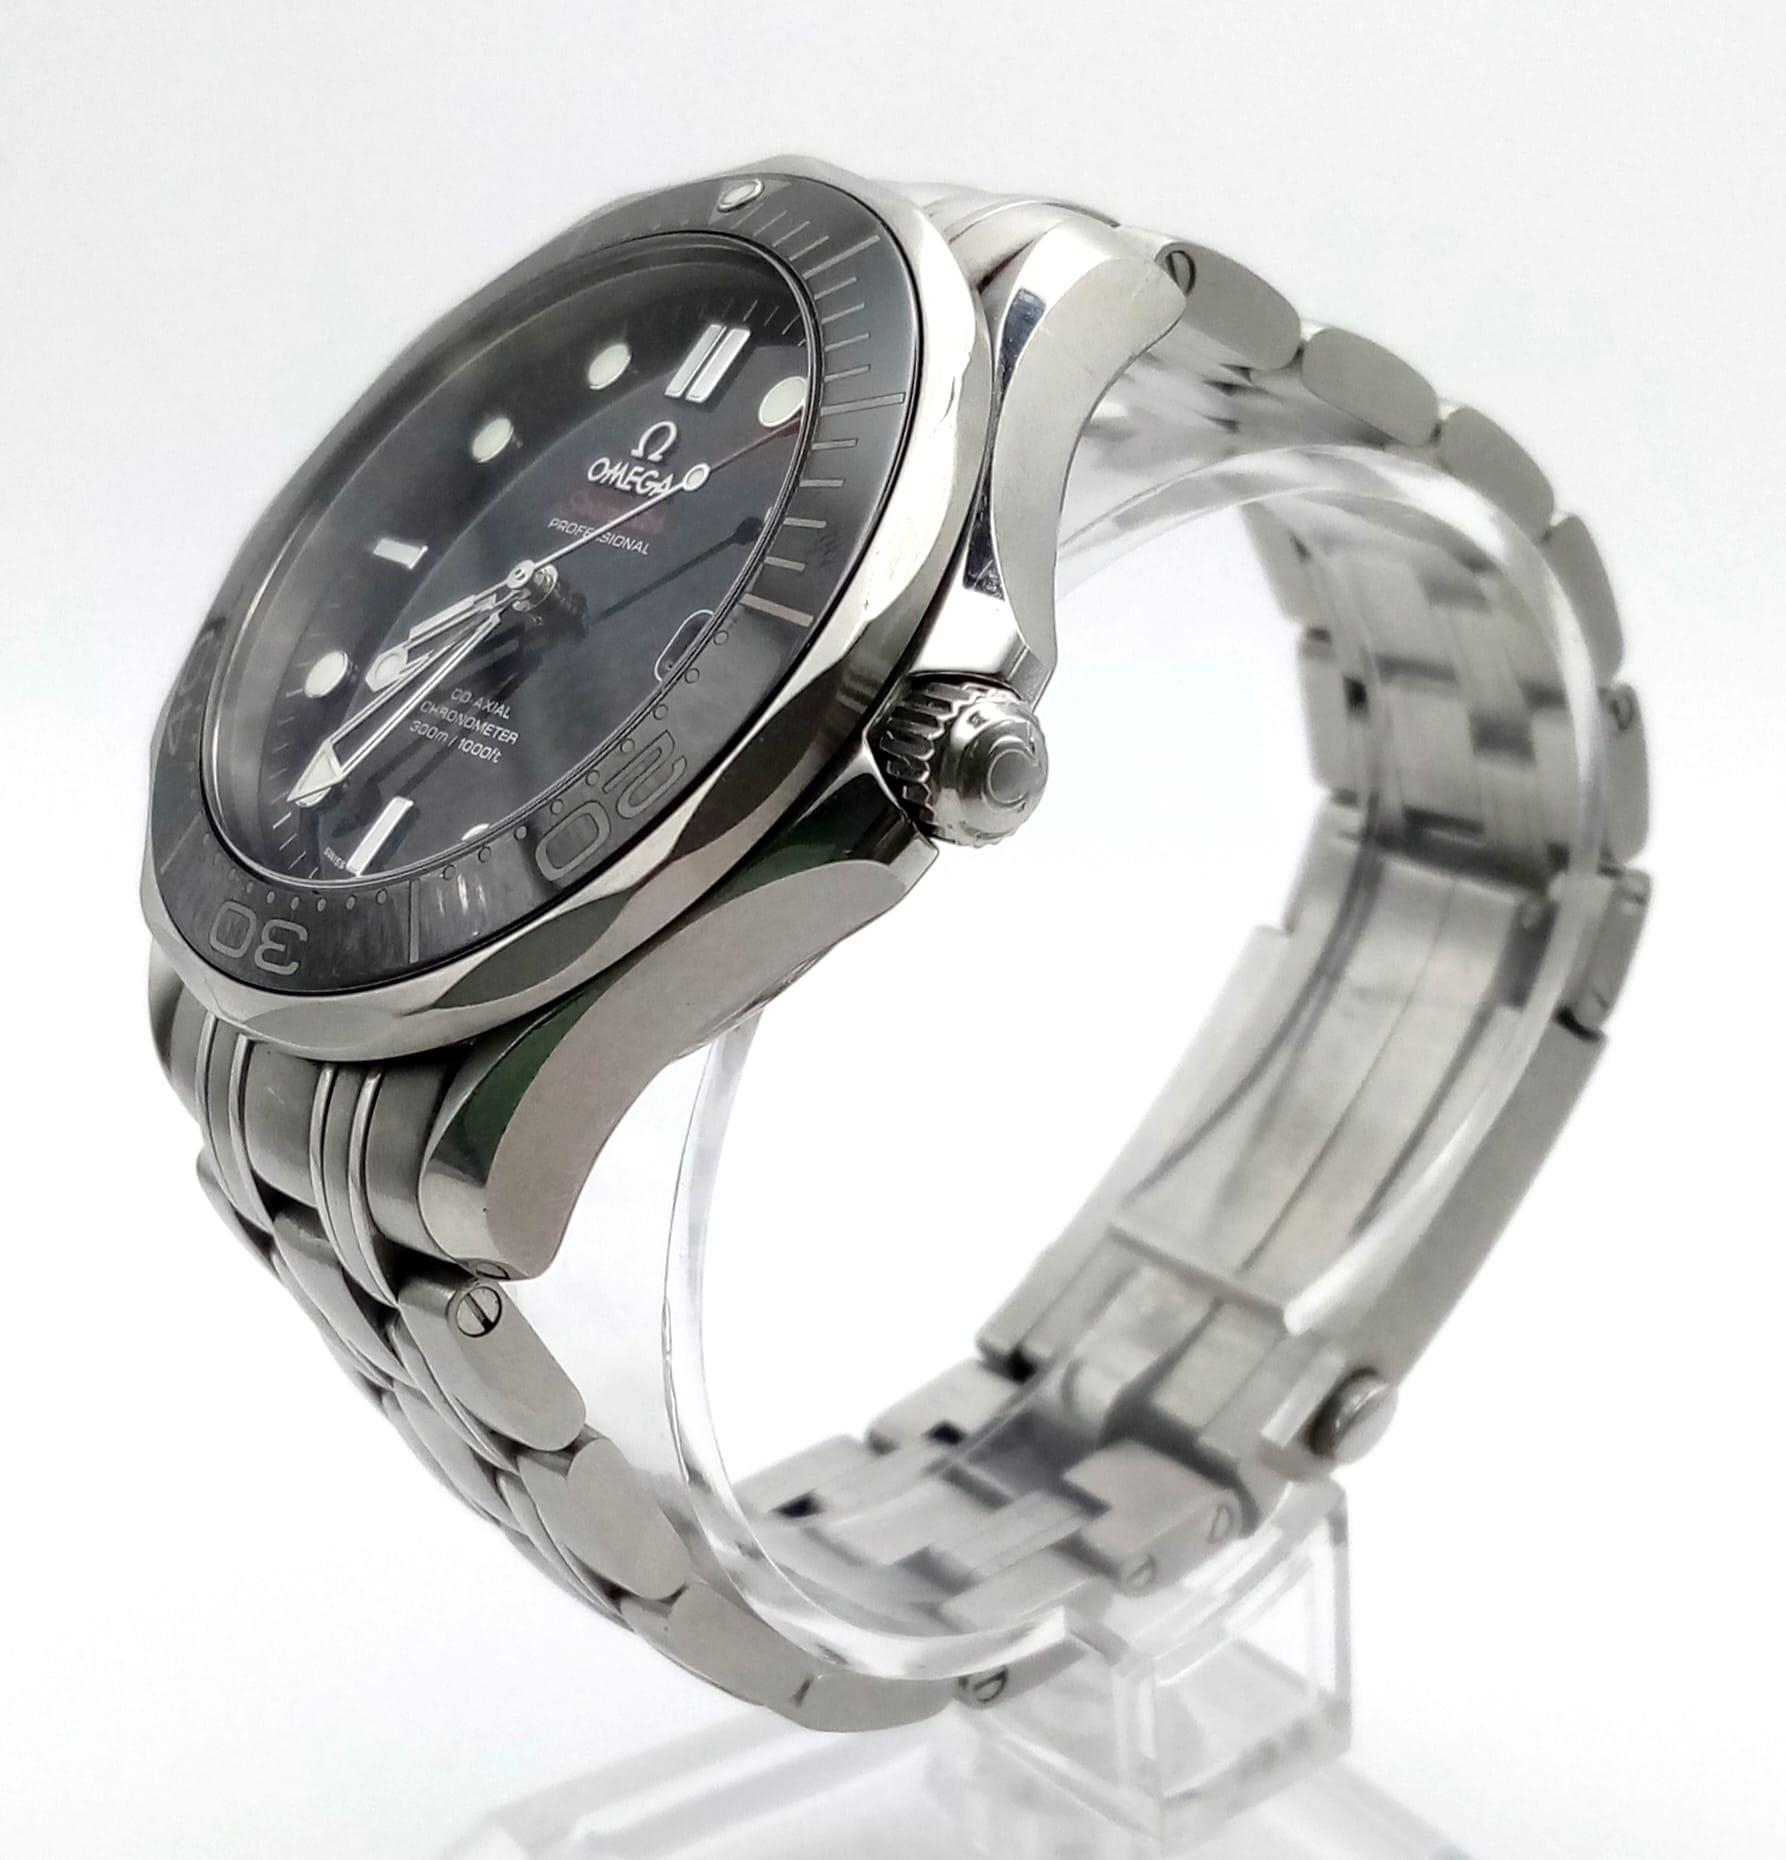 GENTS OMEGA SEAMASTER PROFESSIONAL WATCH WITH BLACK DIAL STAINLESS STEEL BRACELET 42MM 9039 - Image 2 of 4